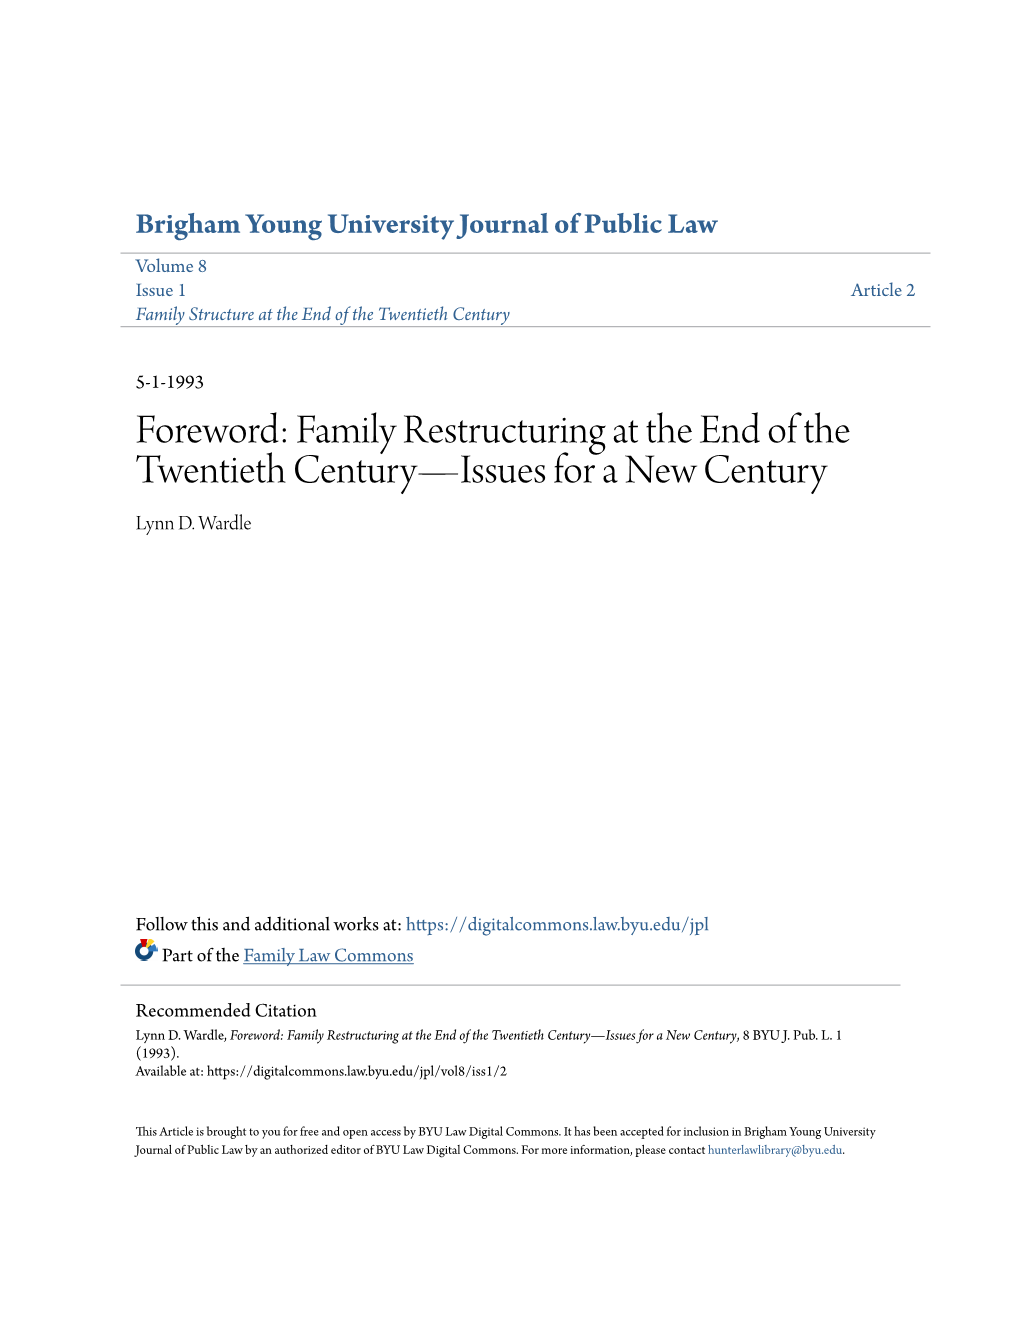 Foreword: Family Restructuring at the End of the Twentieth Century—Issues for a New Century Lynn D